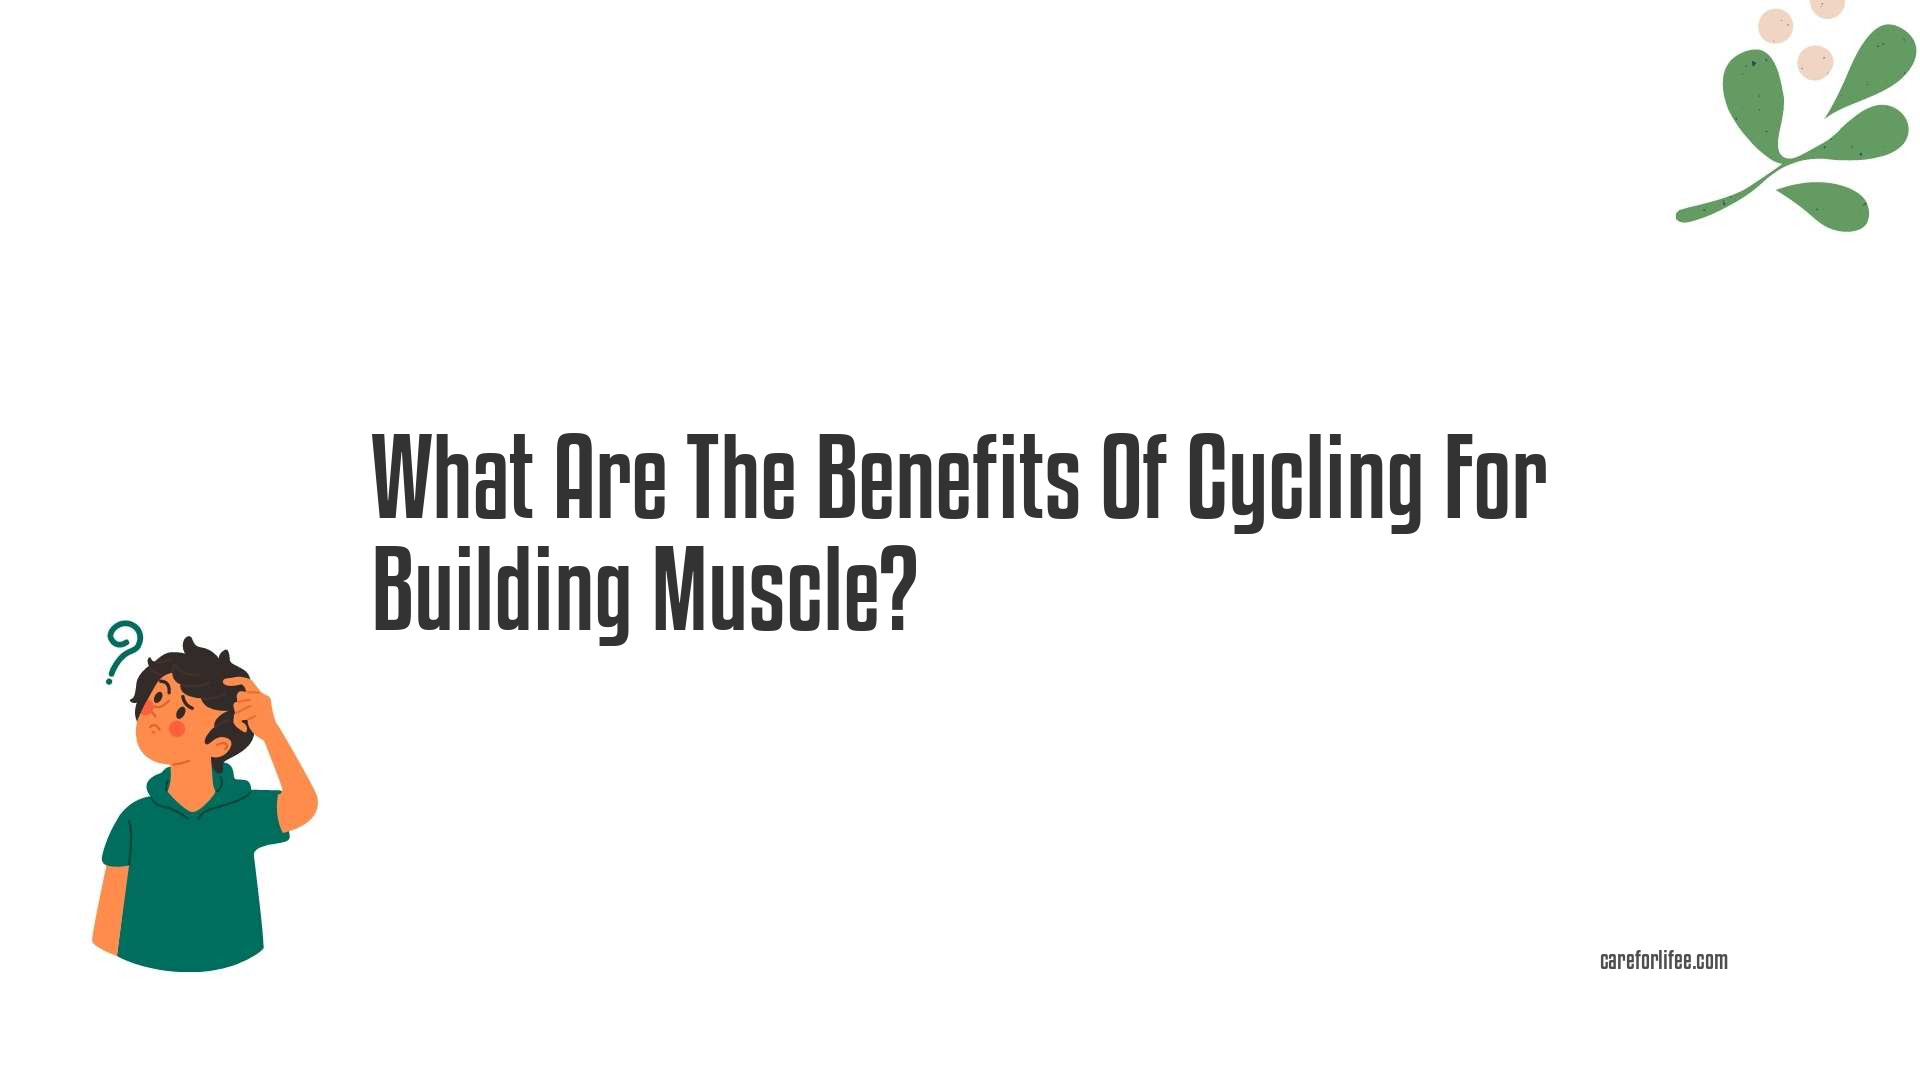 What Are The Benefits Of Cycling For Building Muscle?